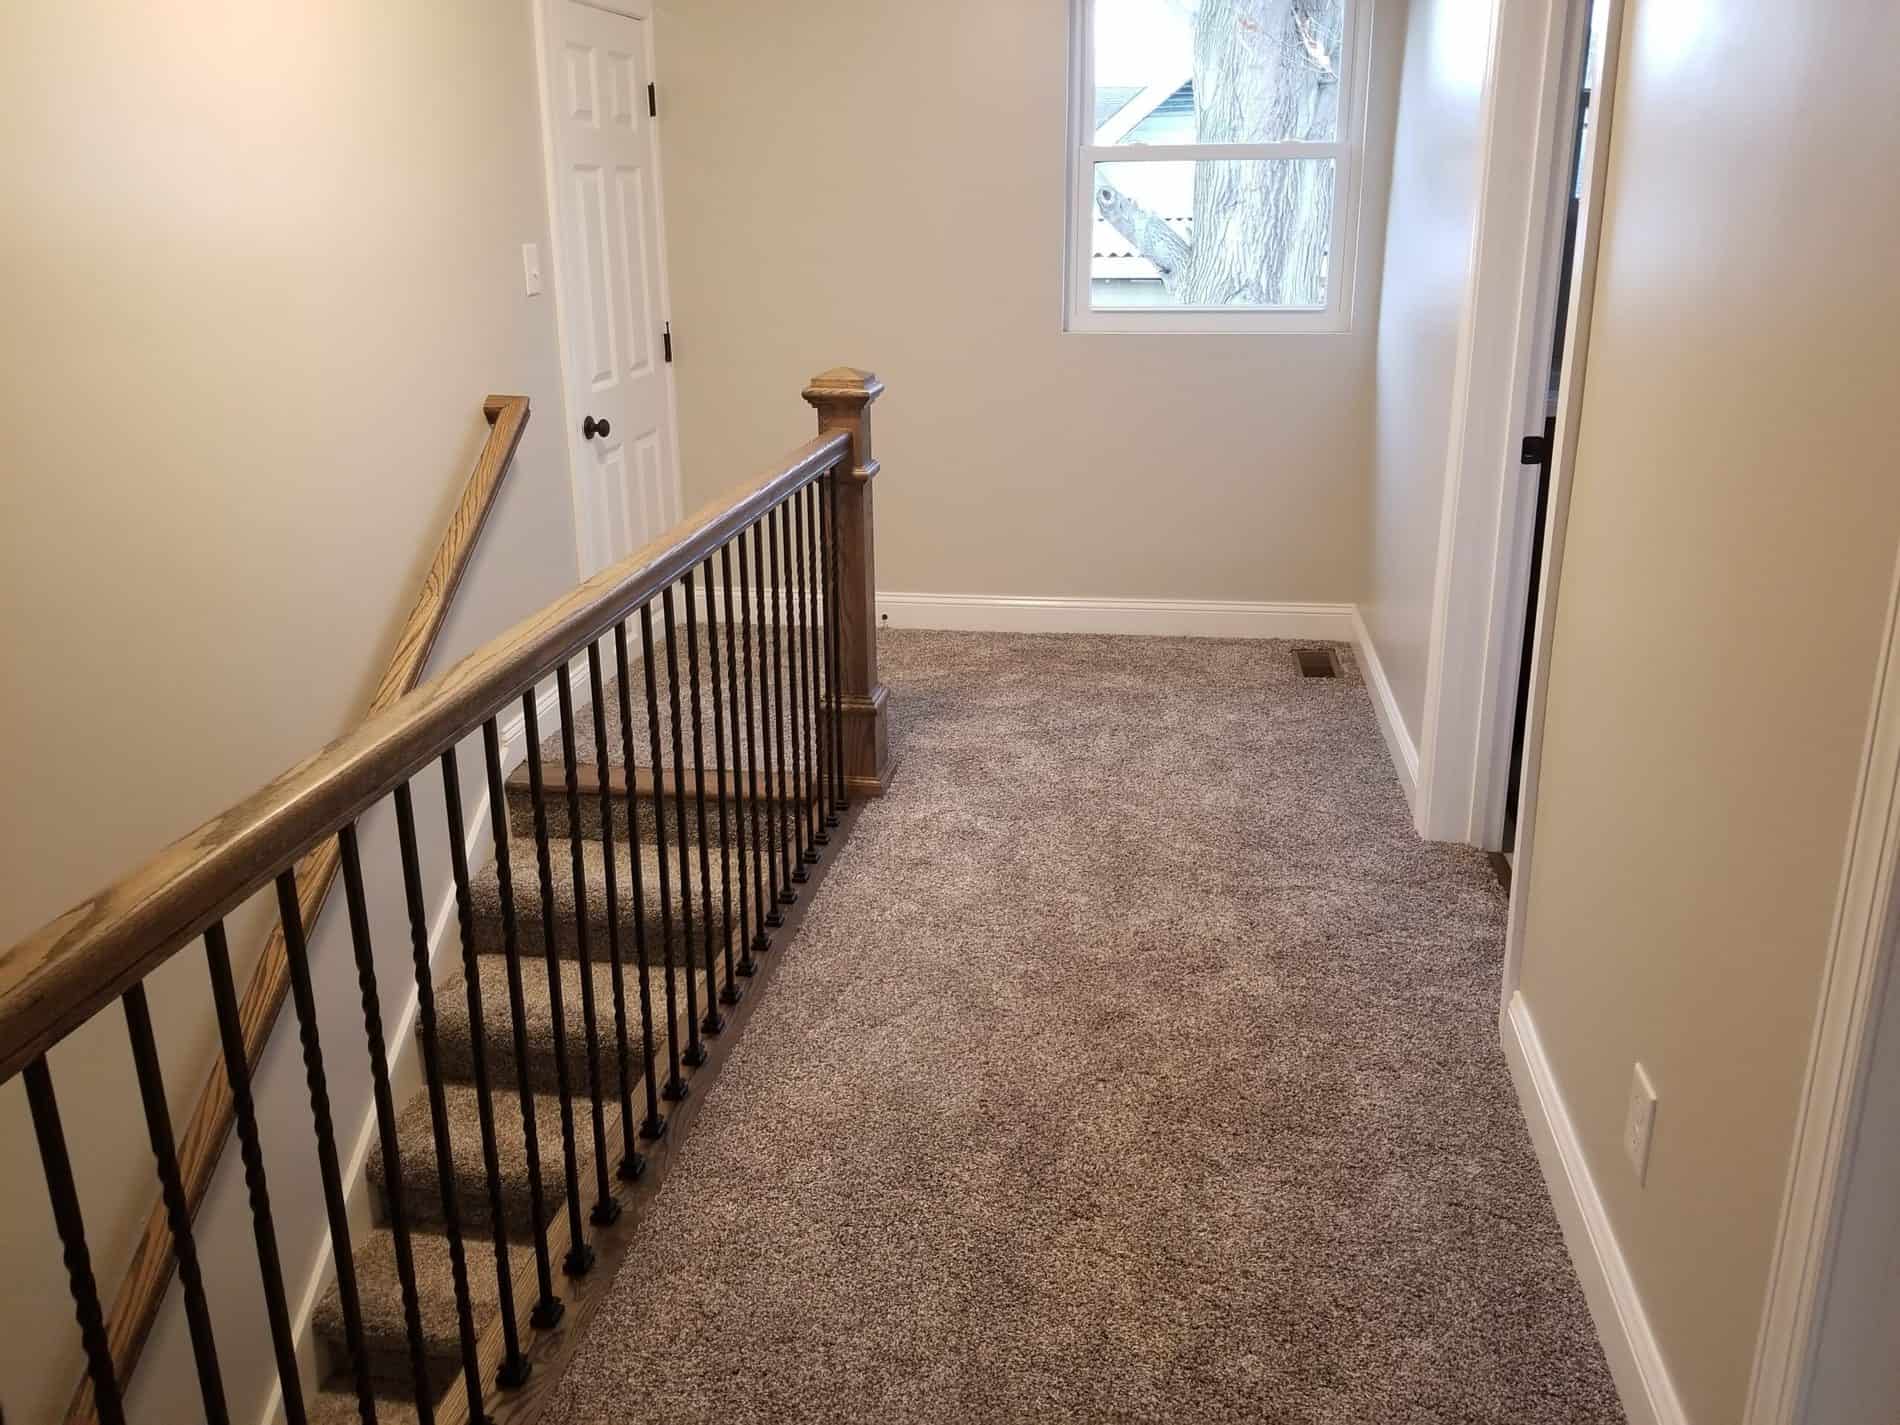 Home Remodel with hallway leading to main floor